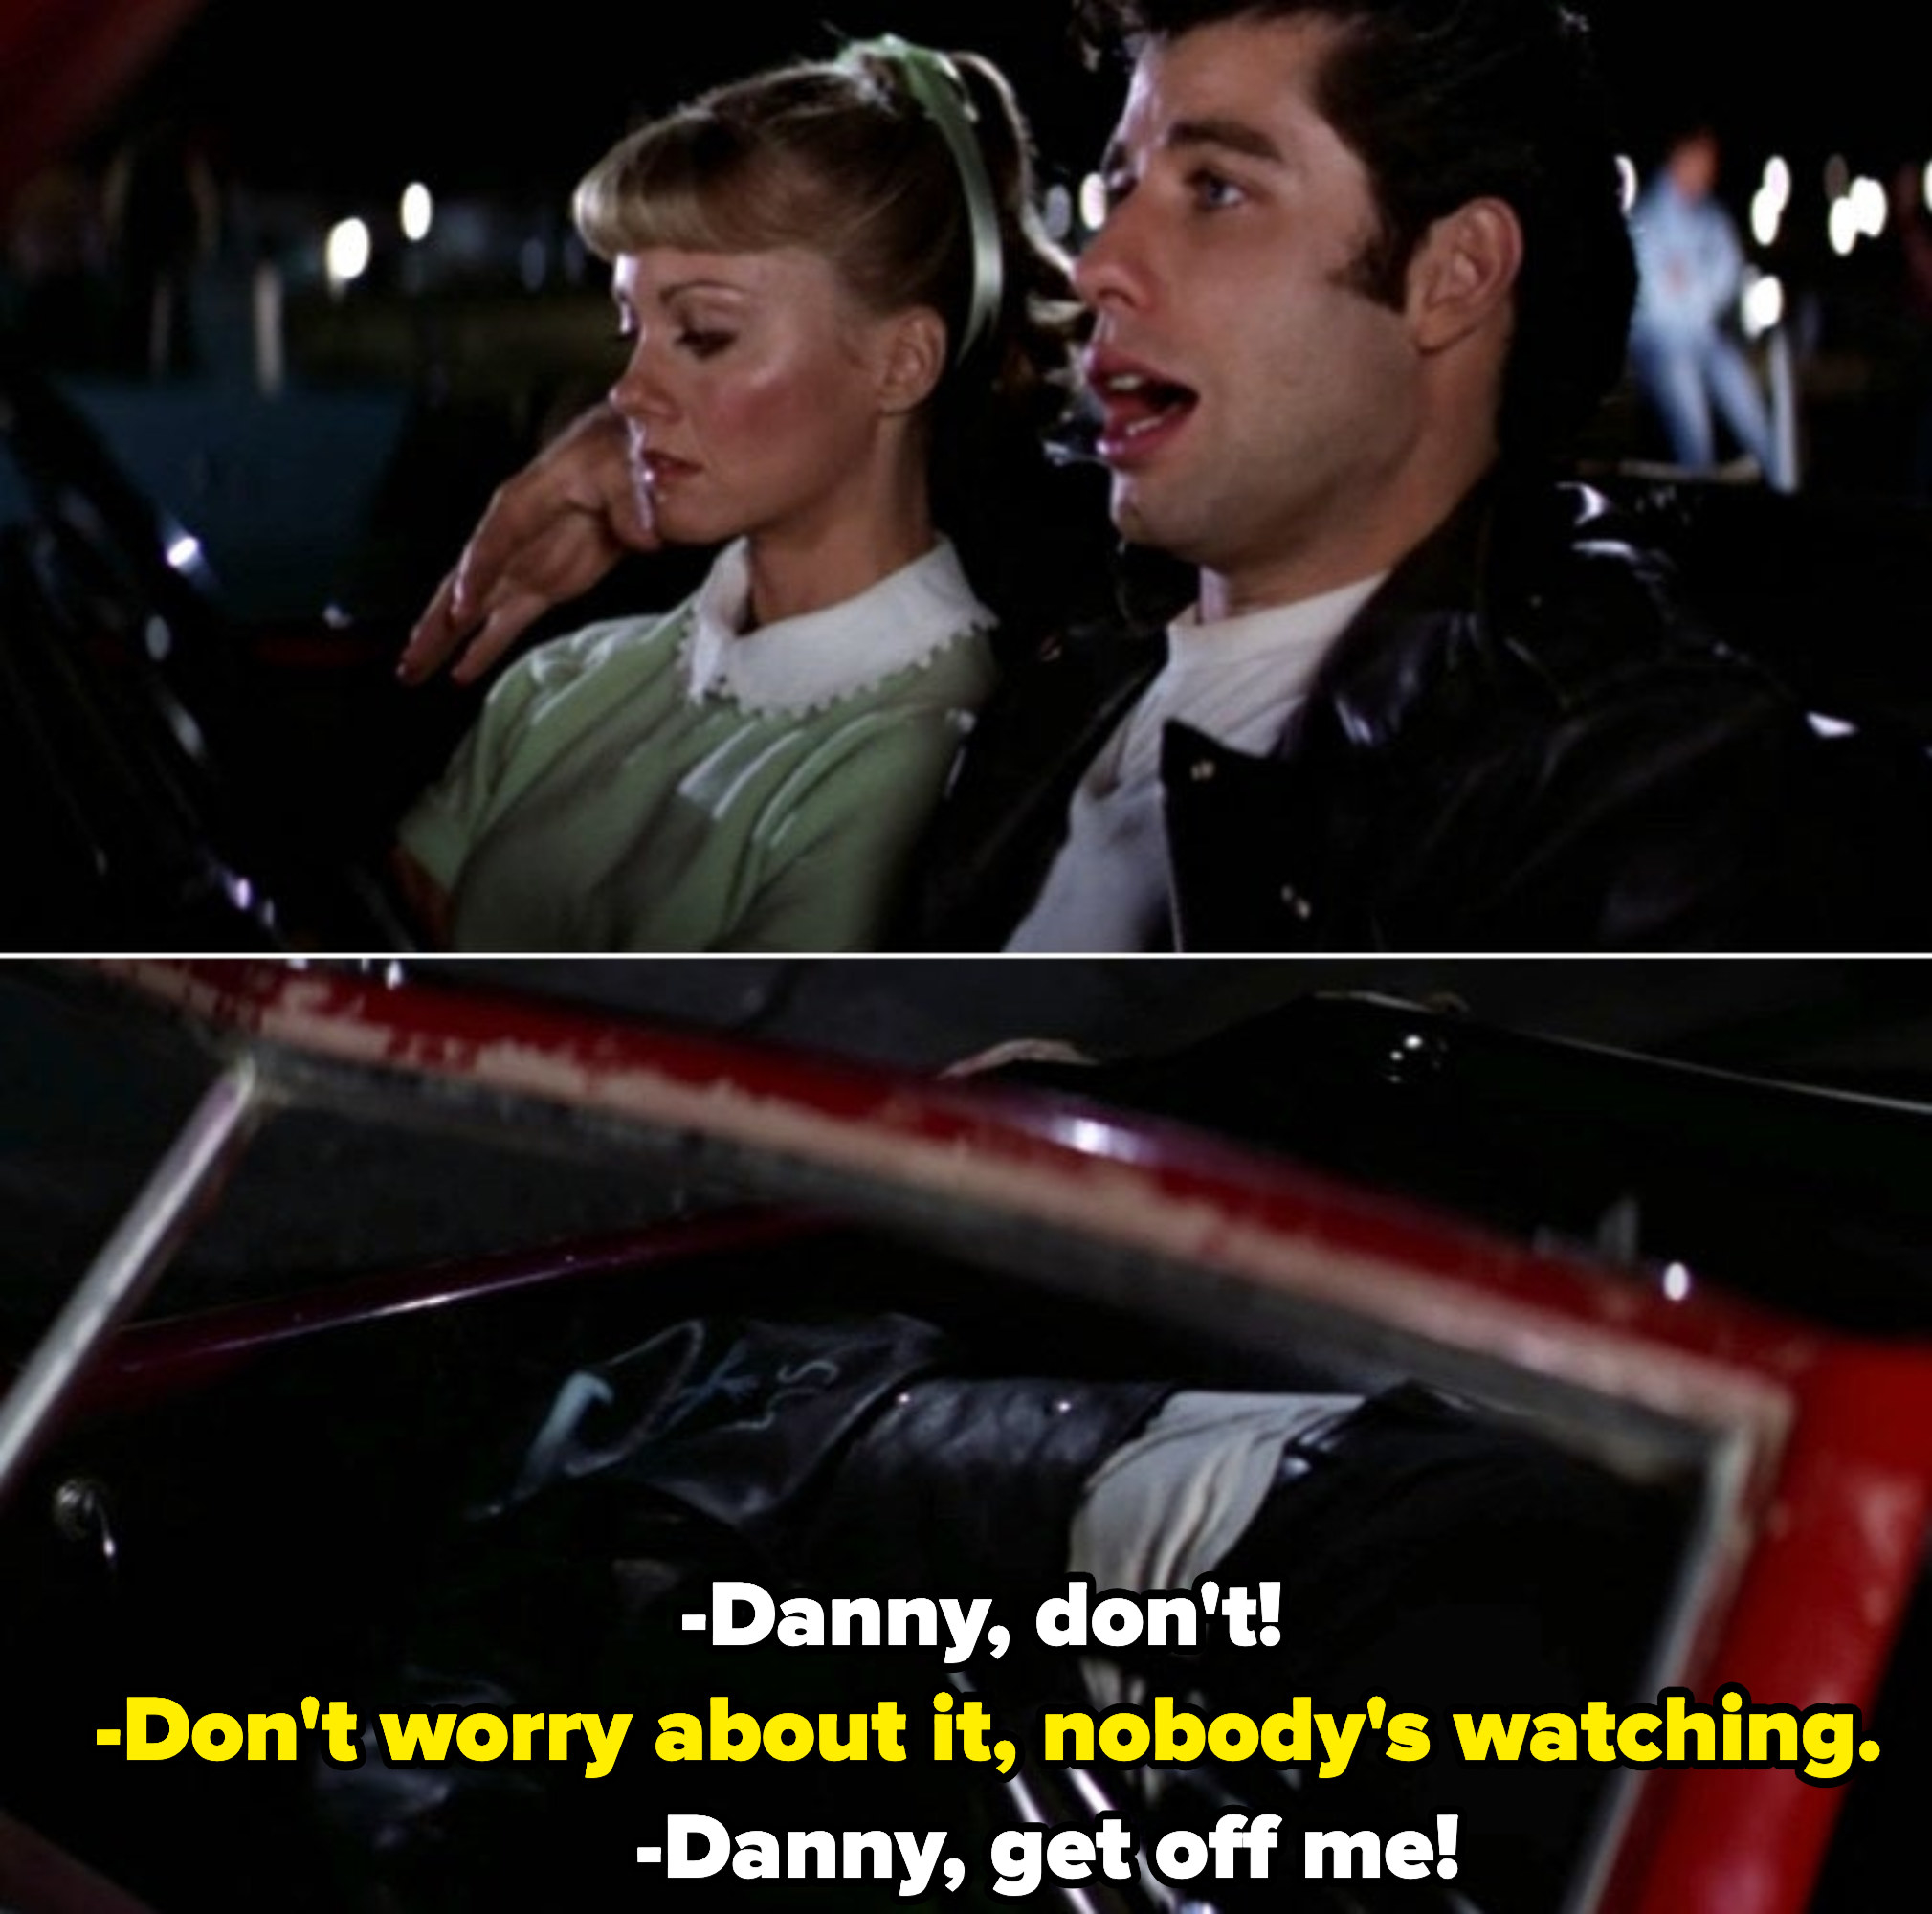 Danny reaching for Sandy&#x27;s breast without her consent at the drive-in; Sandy asking Danny to stop, but he refuses